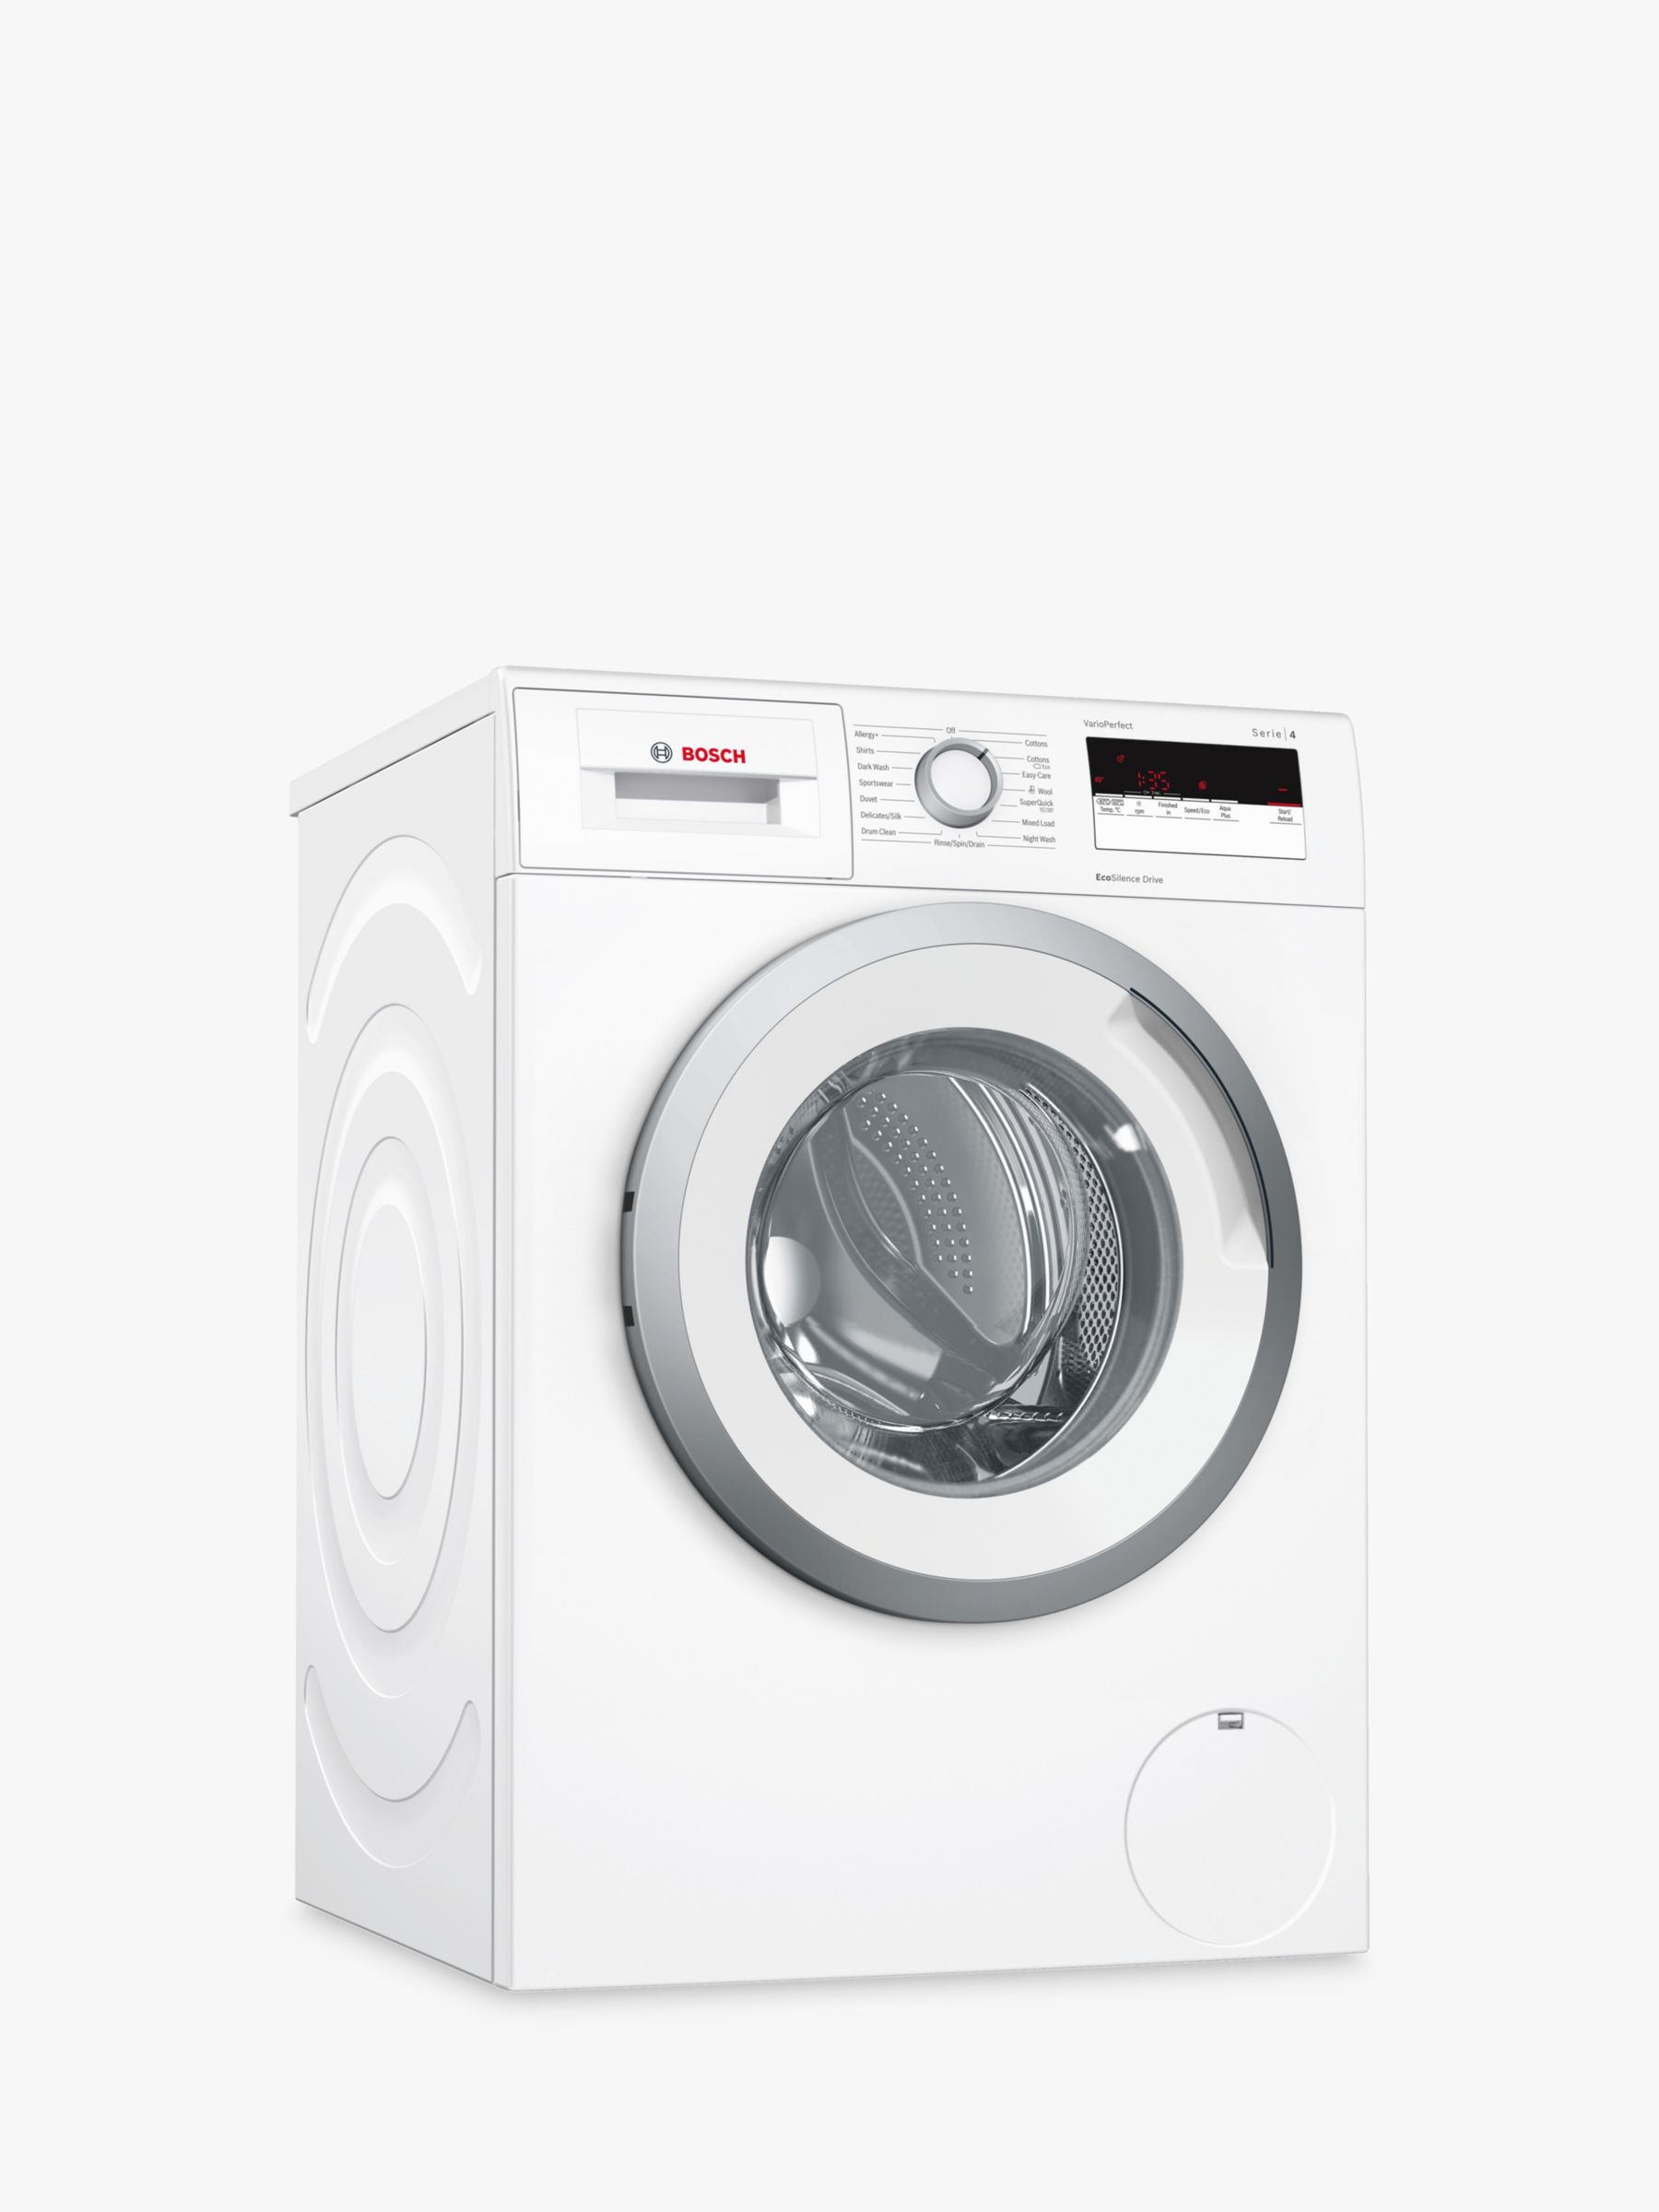 Bosch WAN24108GB Freestanding Washing Machine, 8kg Load, A+++ Energy Rating, 1200RPM Spin, White